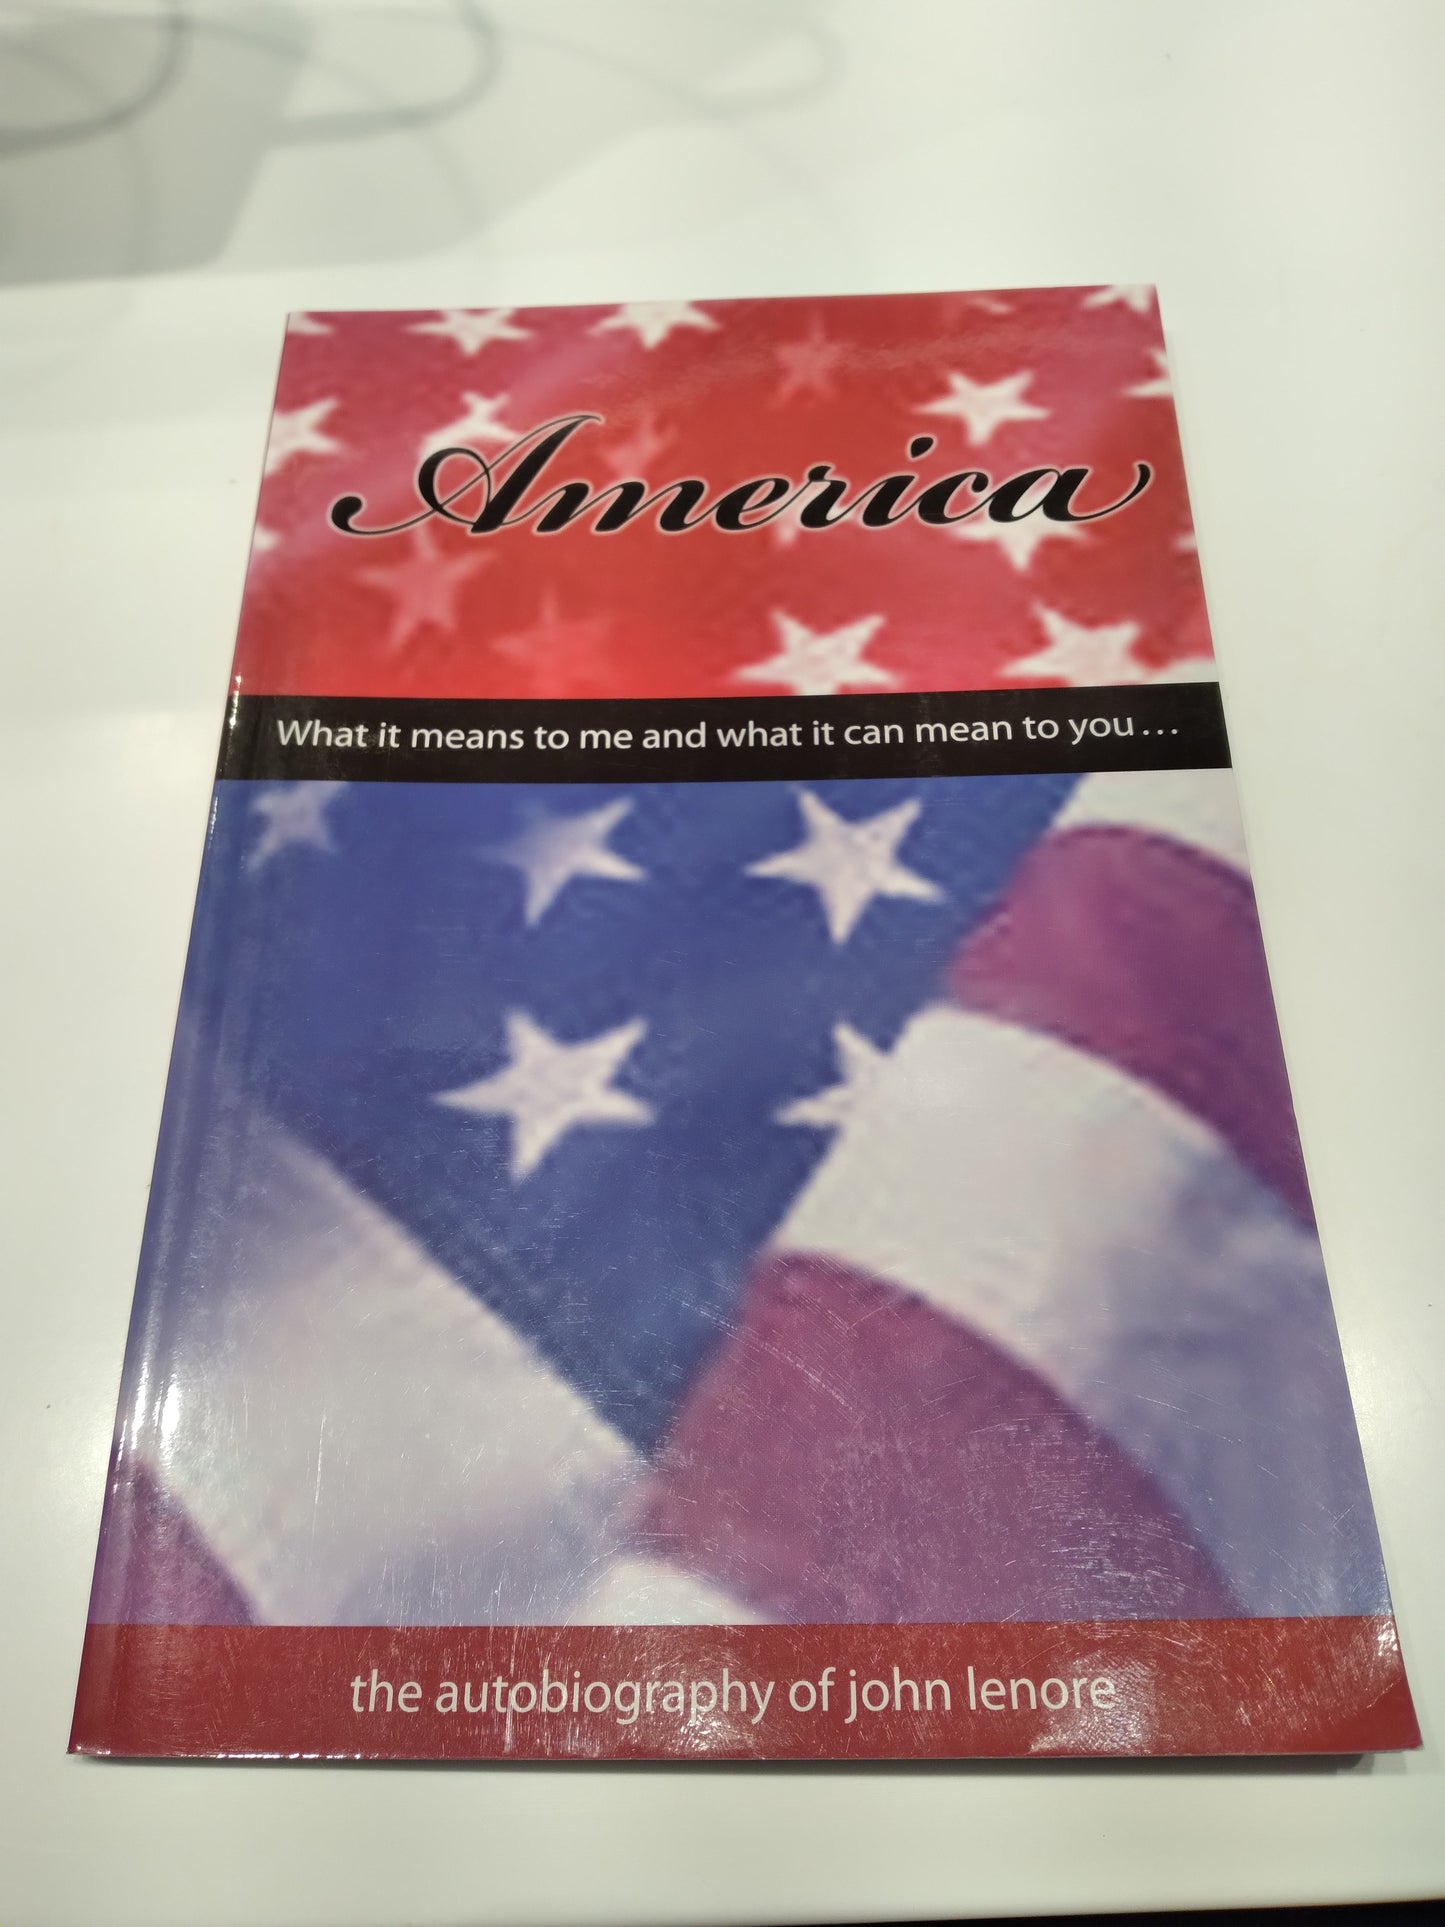 American:What it means to me and what it can mean to you